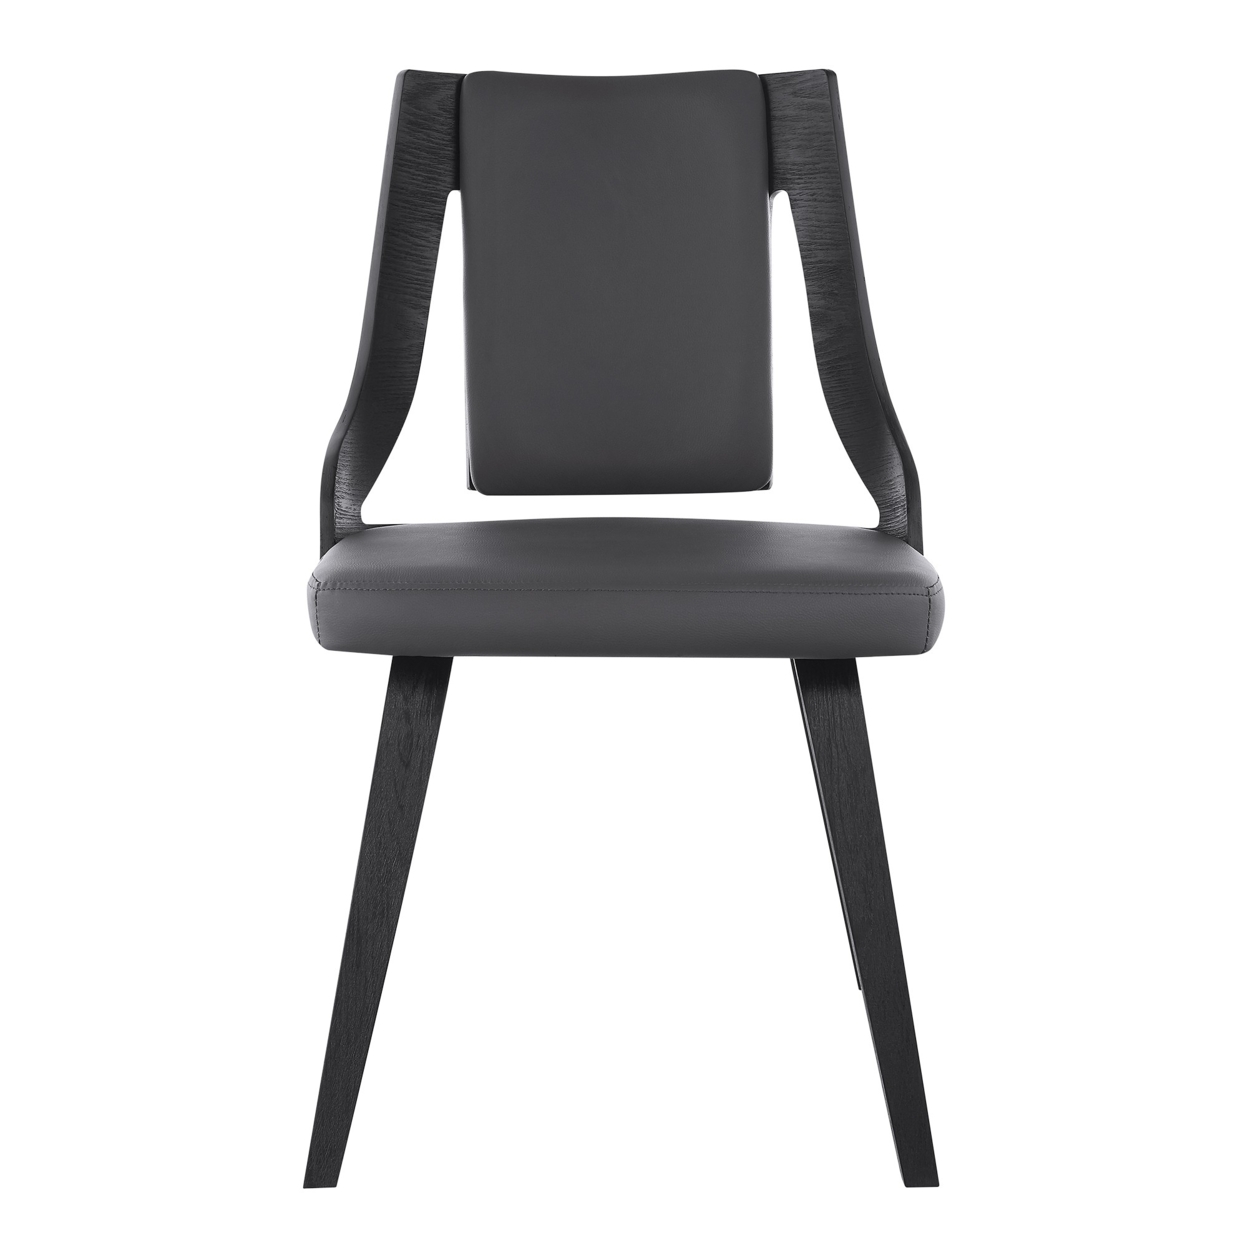 Aniston Gray Faux Leather And Black Wood Dining Chairs - Set Of 2- Saltoro Sherpi